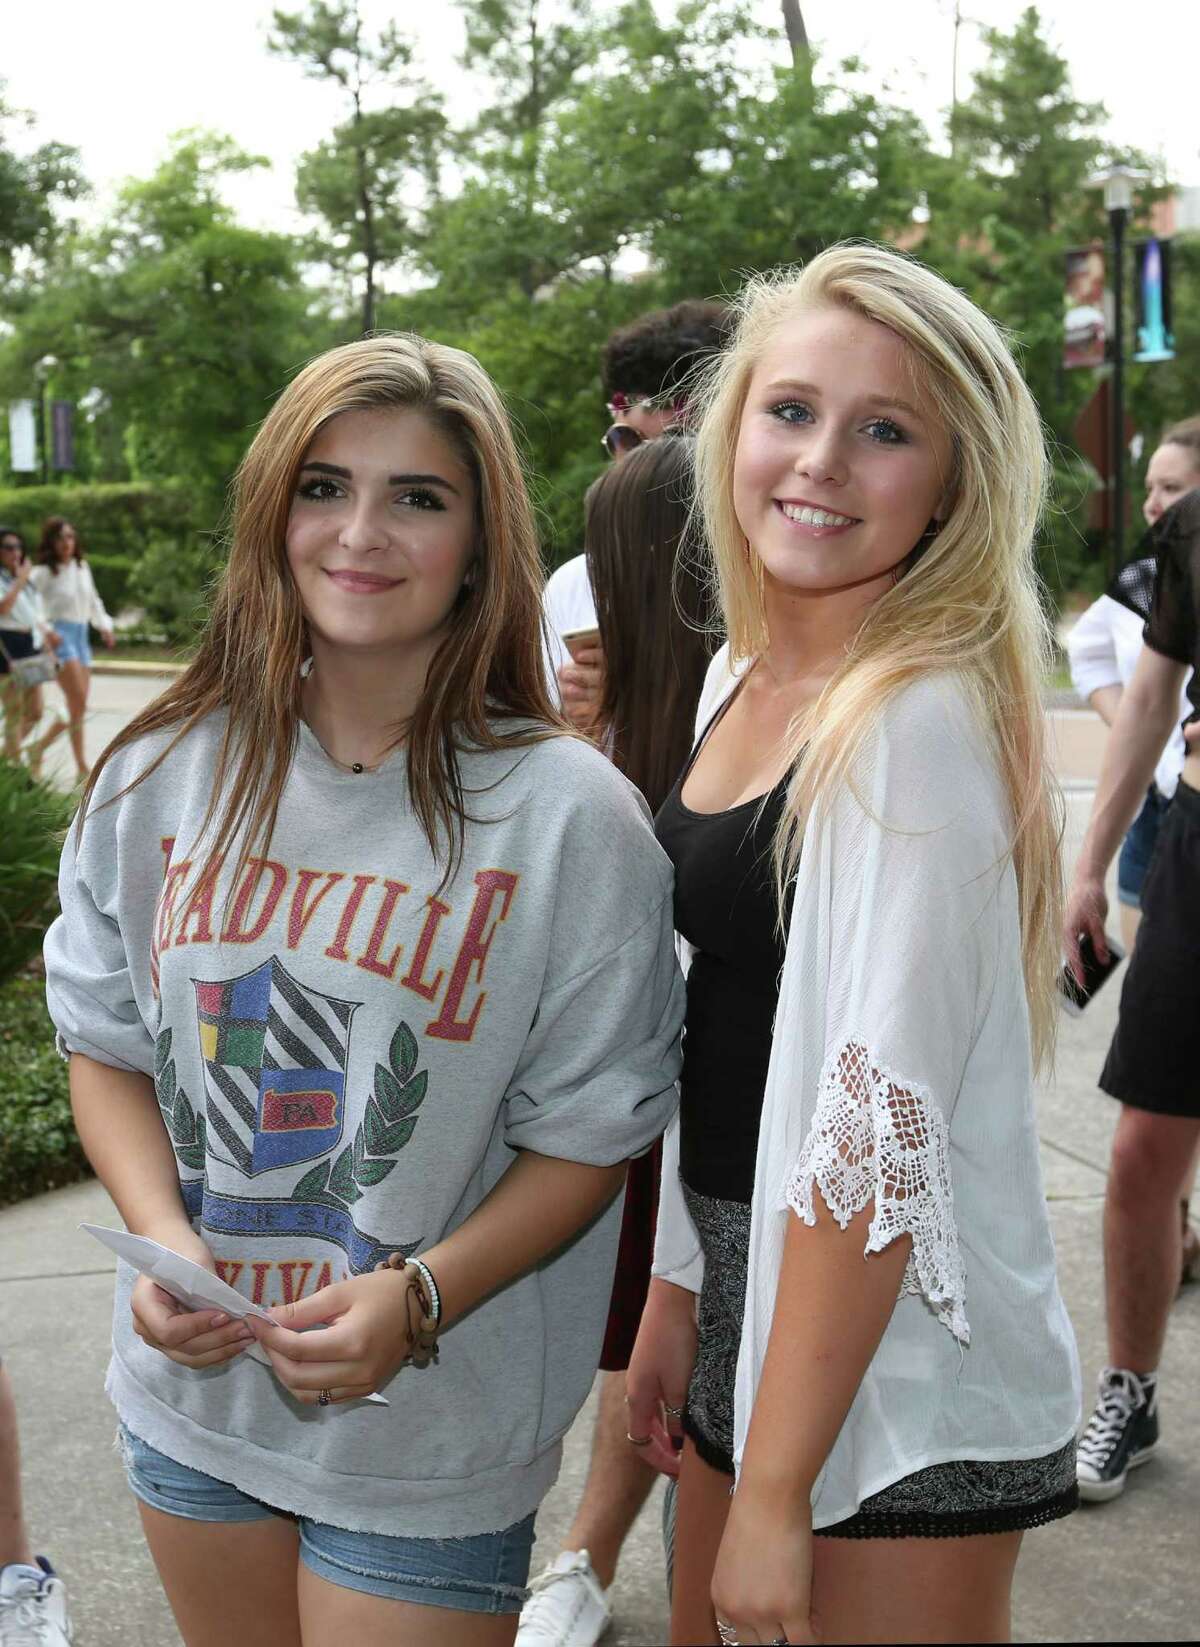 Fans at the Lana Del Rey-Courtney Love concert at the Cynthia Woods Mitchell Pavilion on May 7.